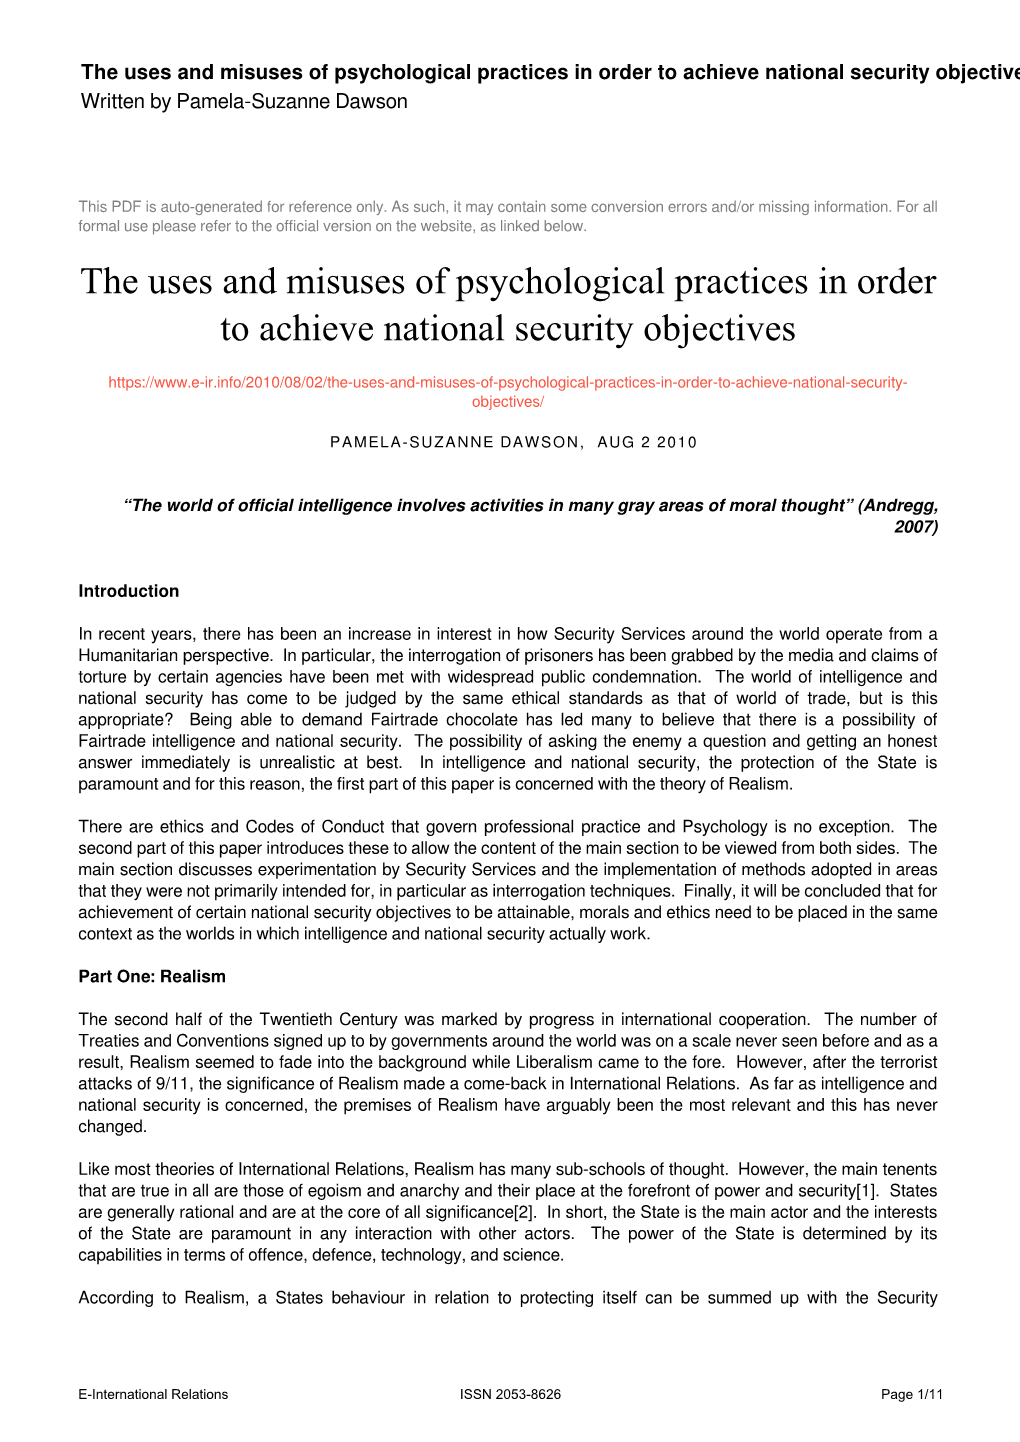 The Uses and Misuses of Psychological Practices in Order to Achieve National Security Objectives Written by Pamela-Suzanne Dawson